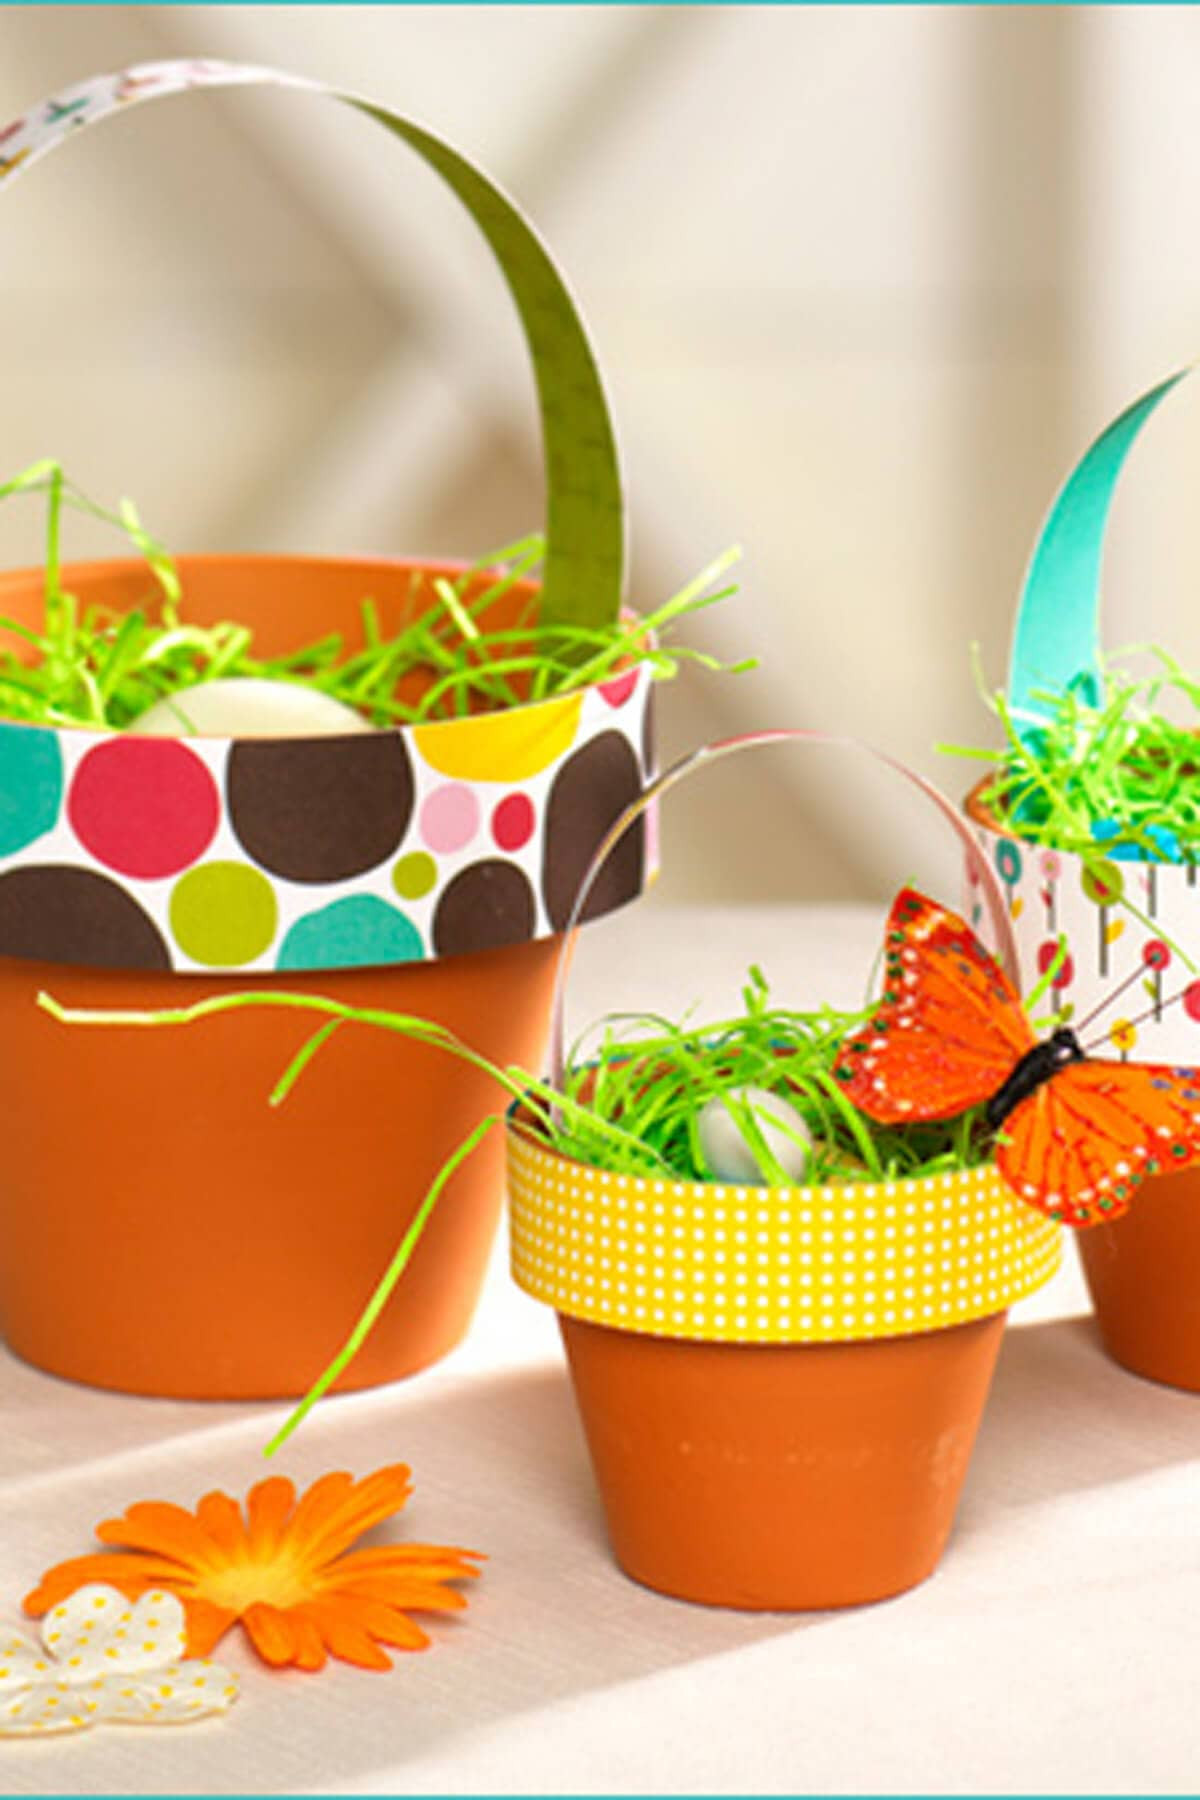 Diy Easter Basket
 25 Creative DIY Easter Basket Ideas that Can Be Done in